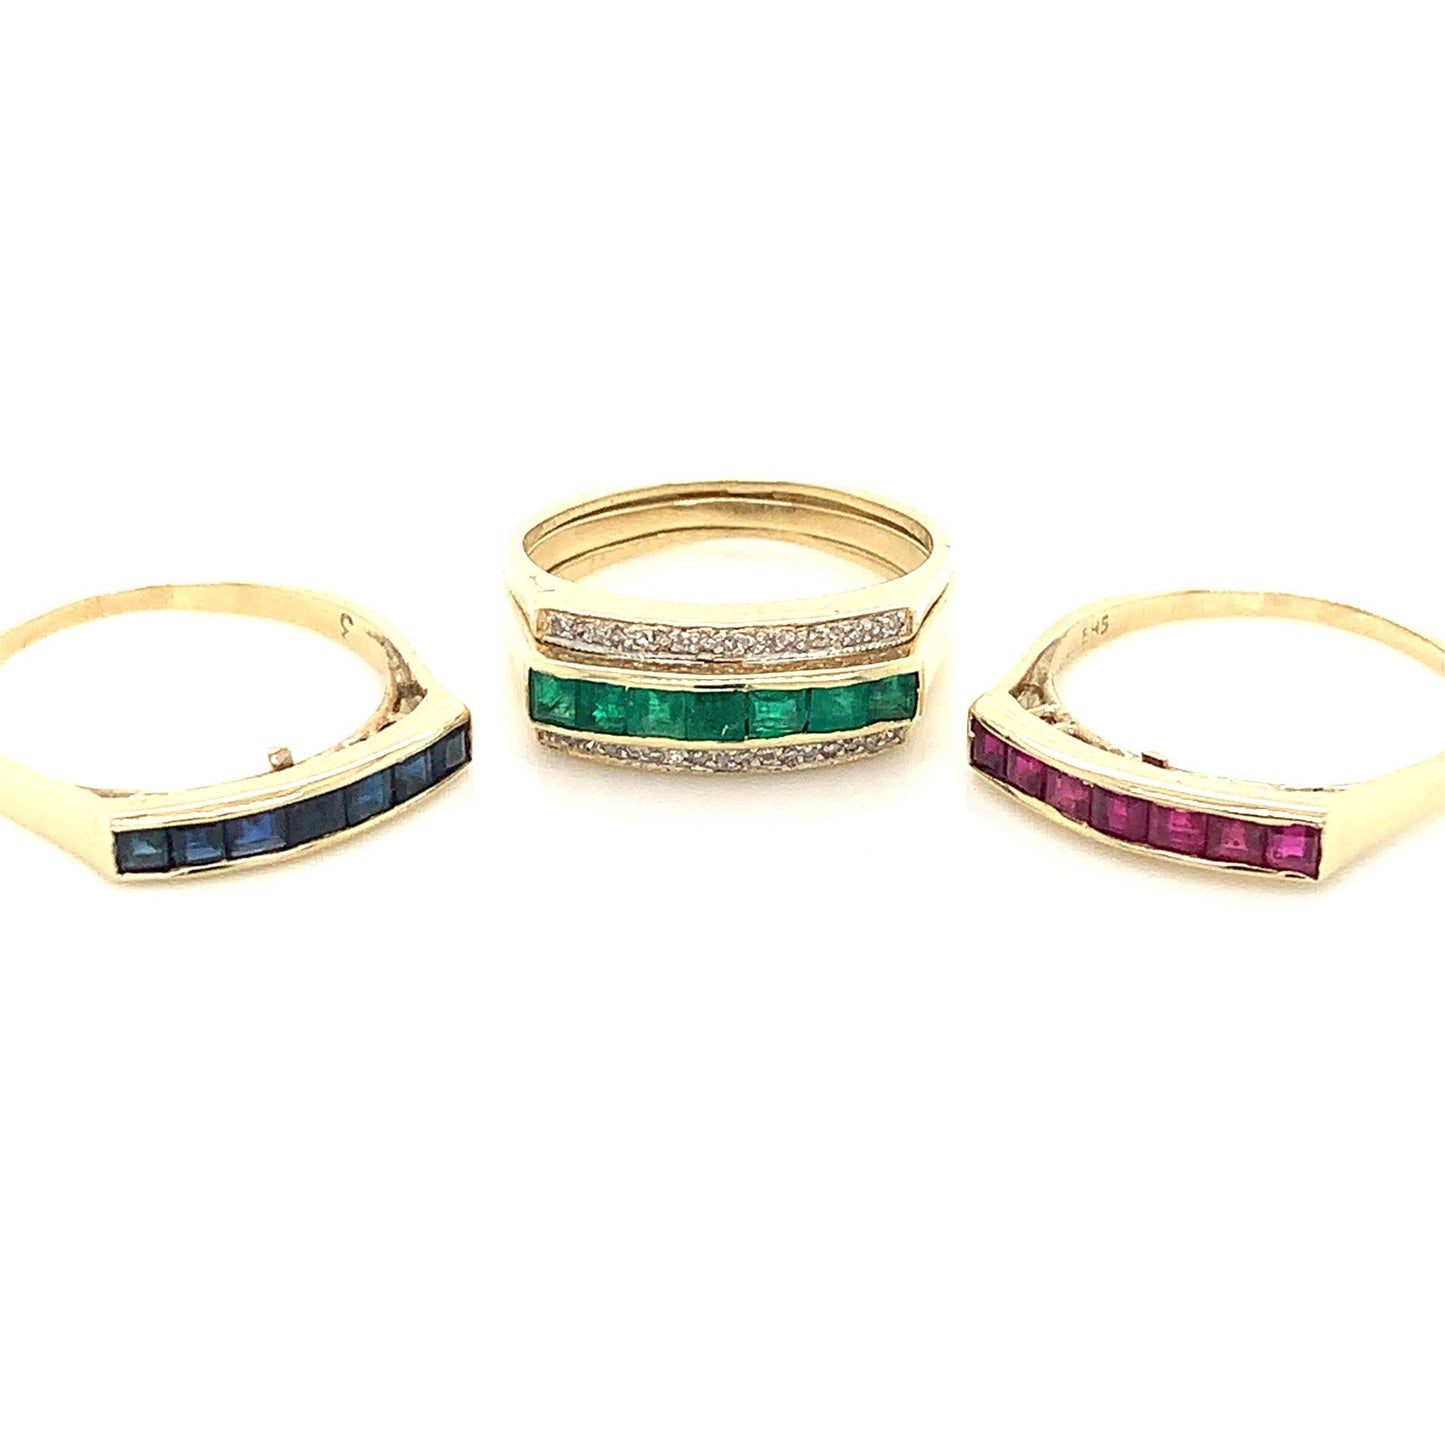 Interchangeable Emerald, Sapphire, and Ruby 3-Ring Set